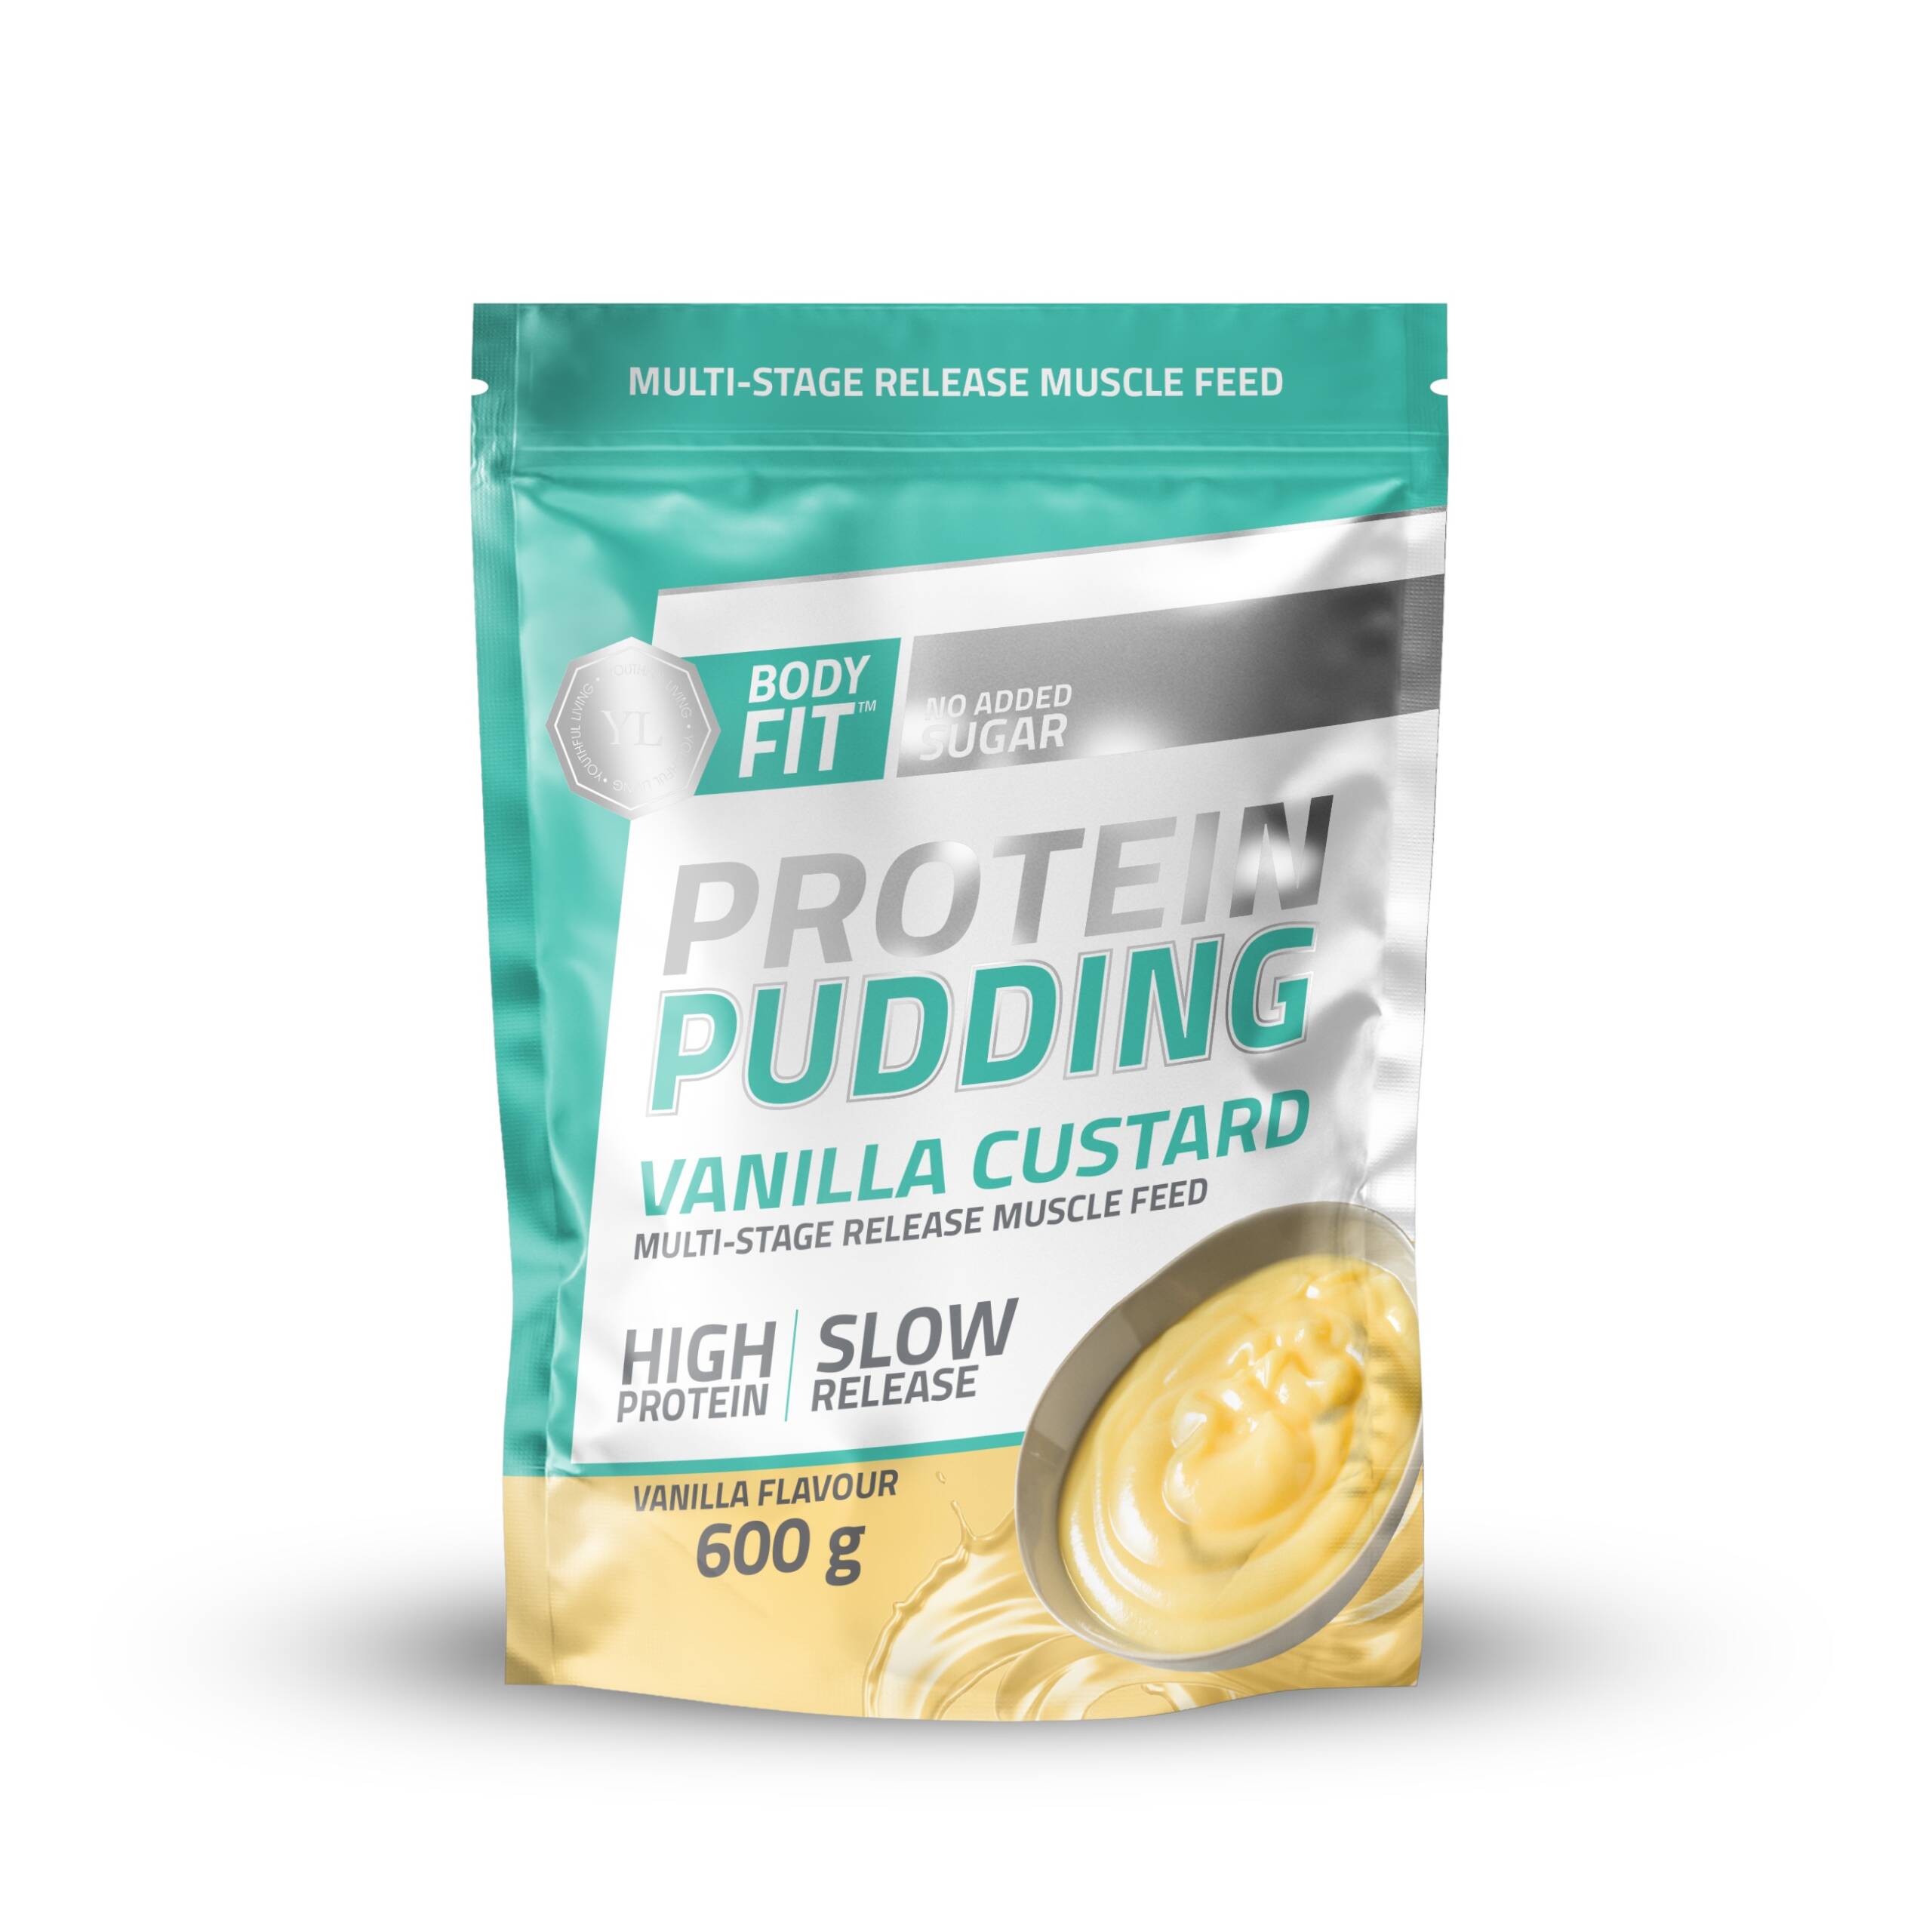 YL BF Protein Pudding Custard scaled